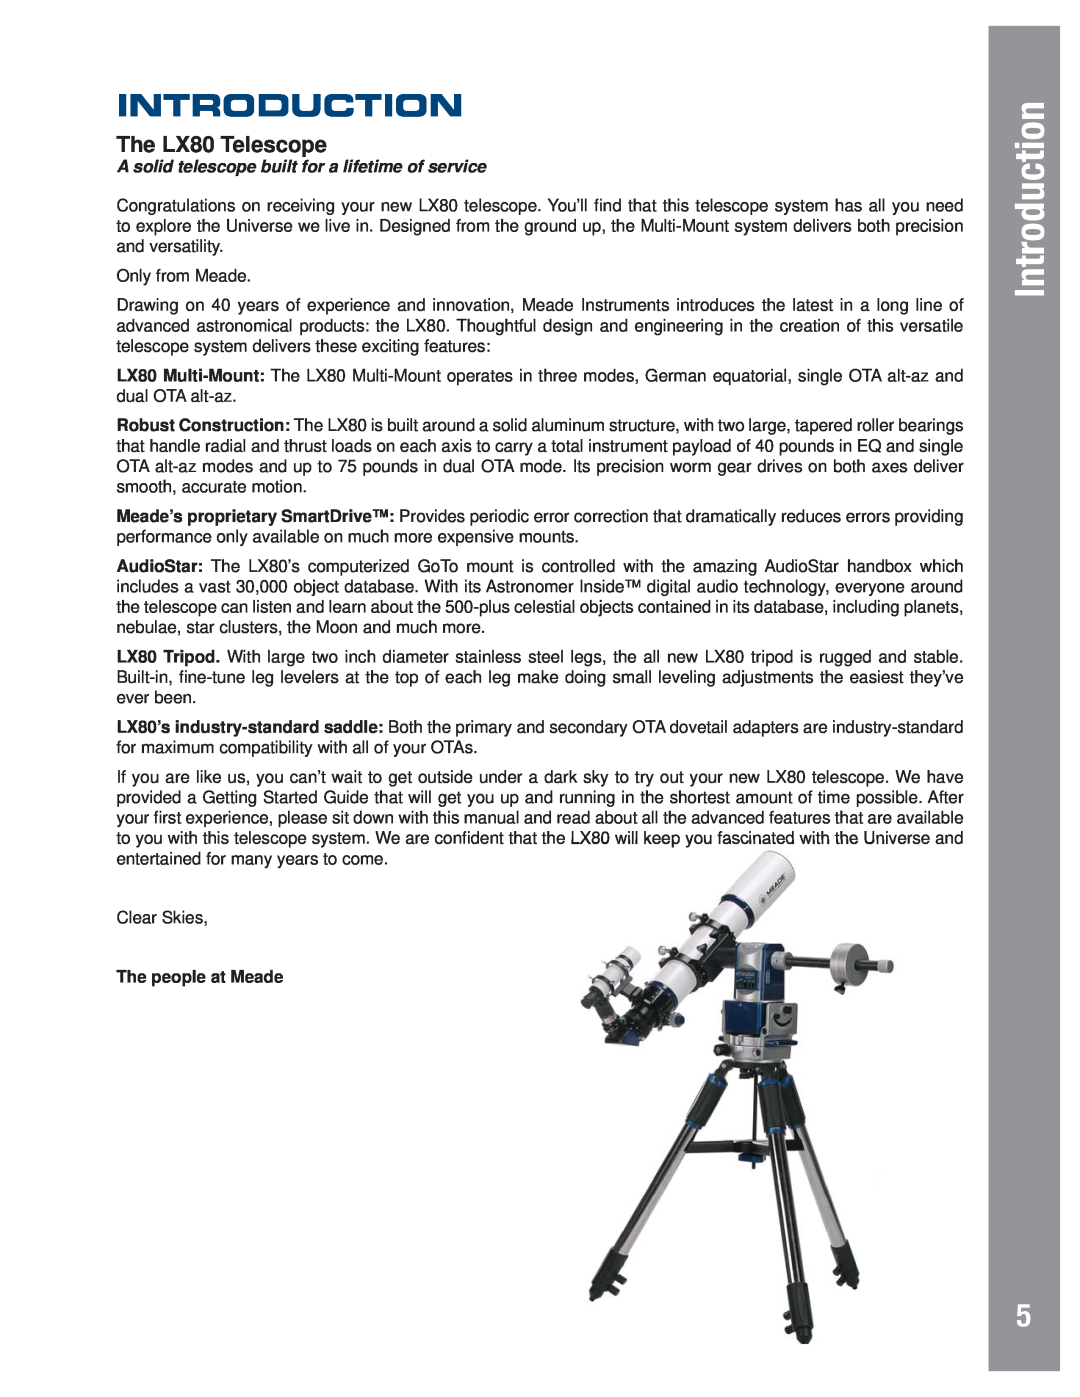 Meade Introduction, The LX80 Telescope, A solid telescope built for a lifetime of service, The people at Meade 